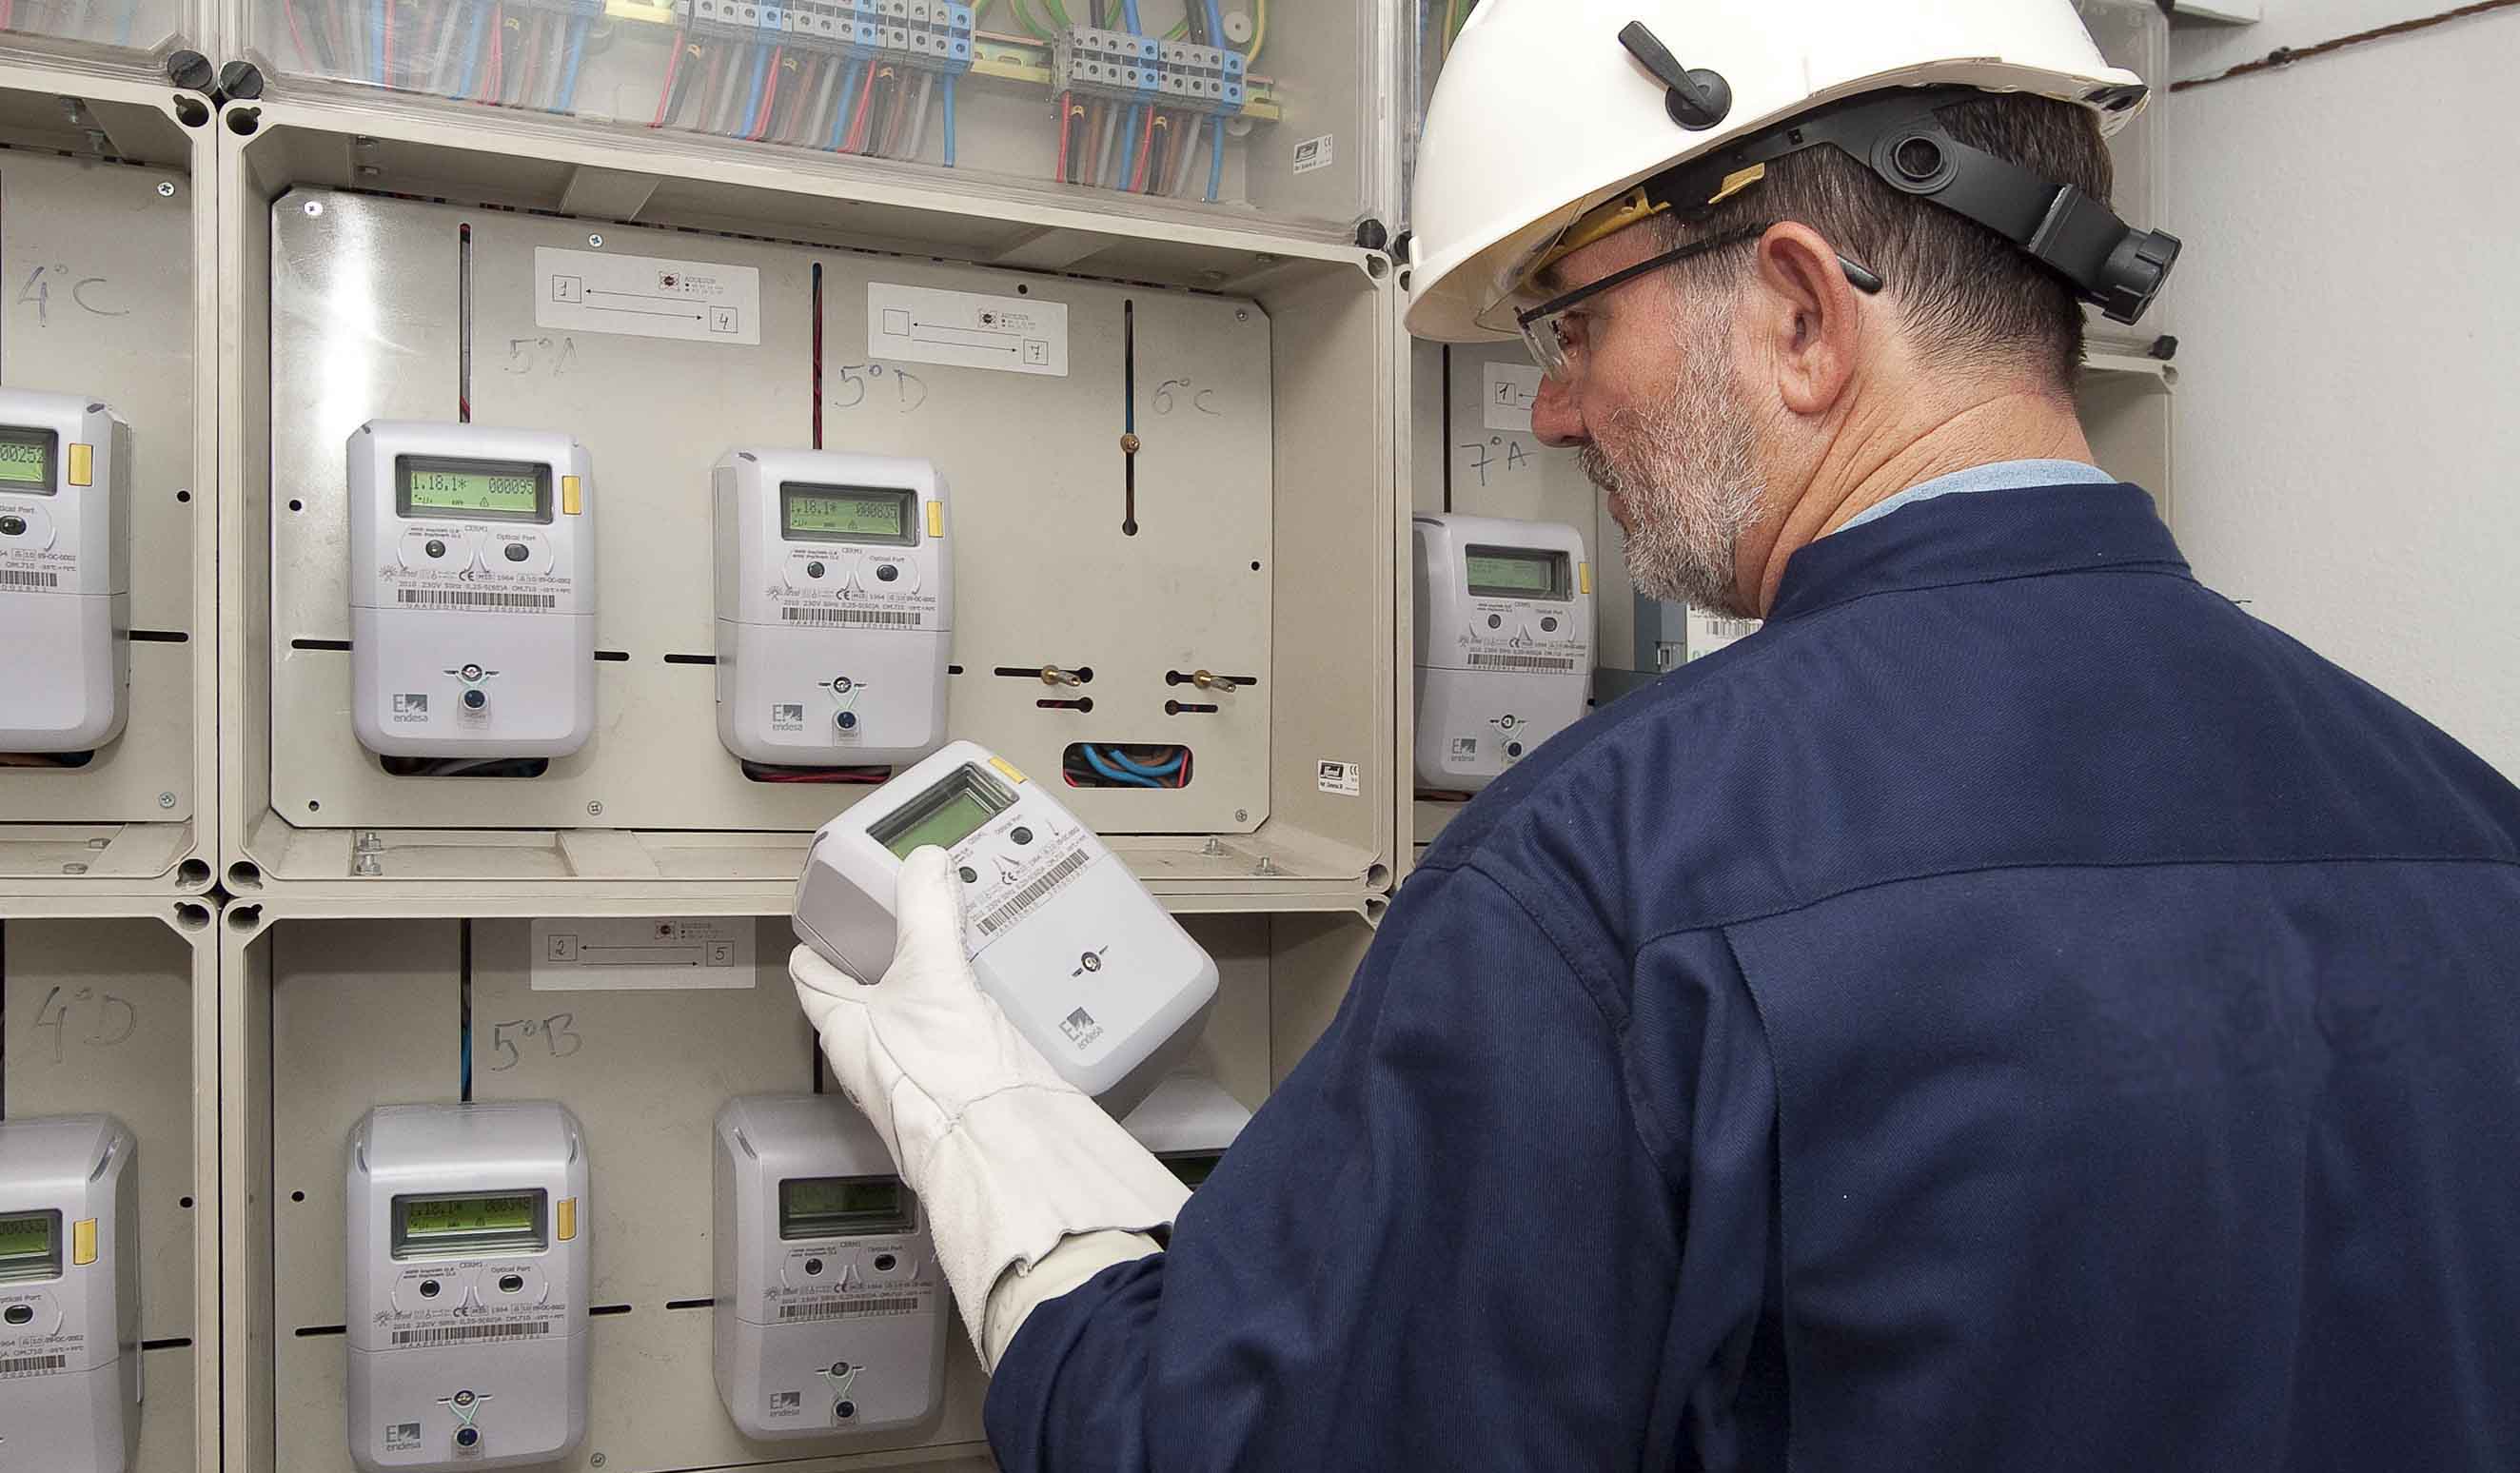 Operator working on a centralised meter system